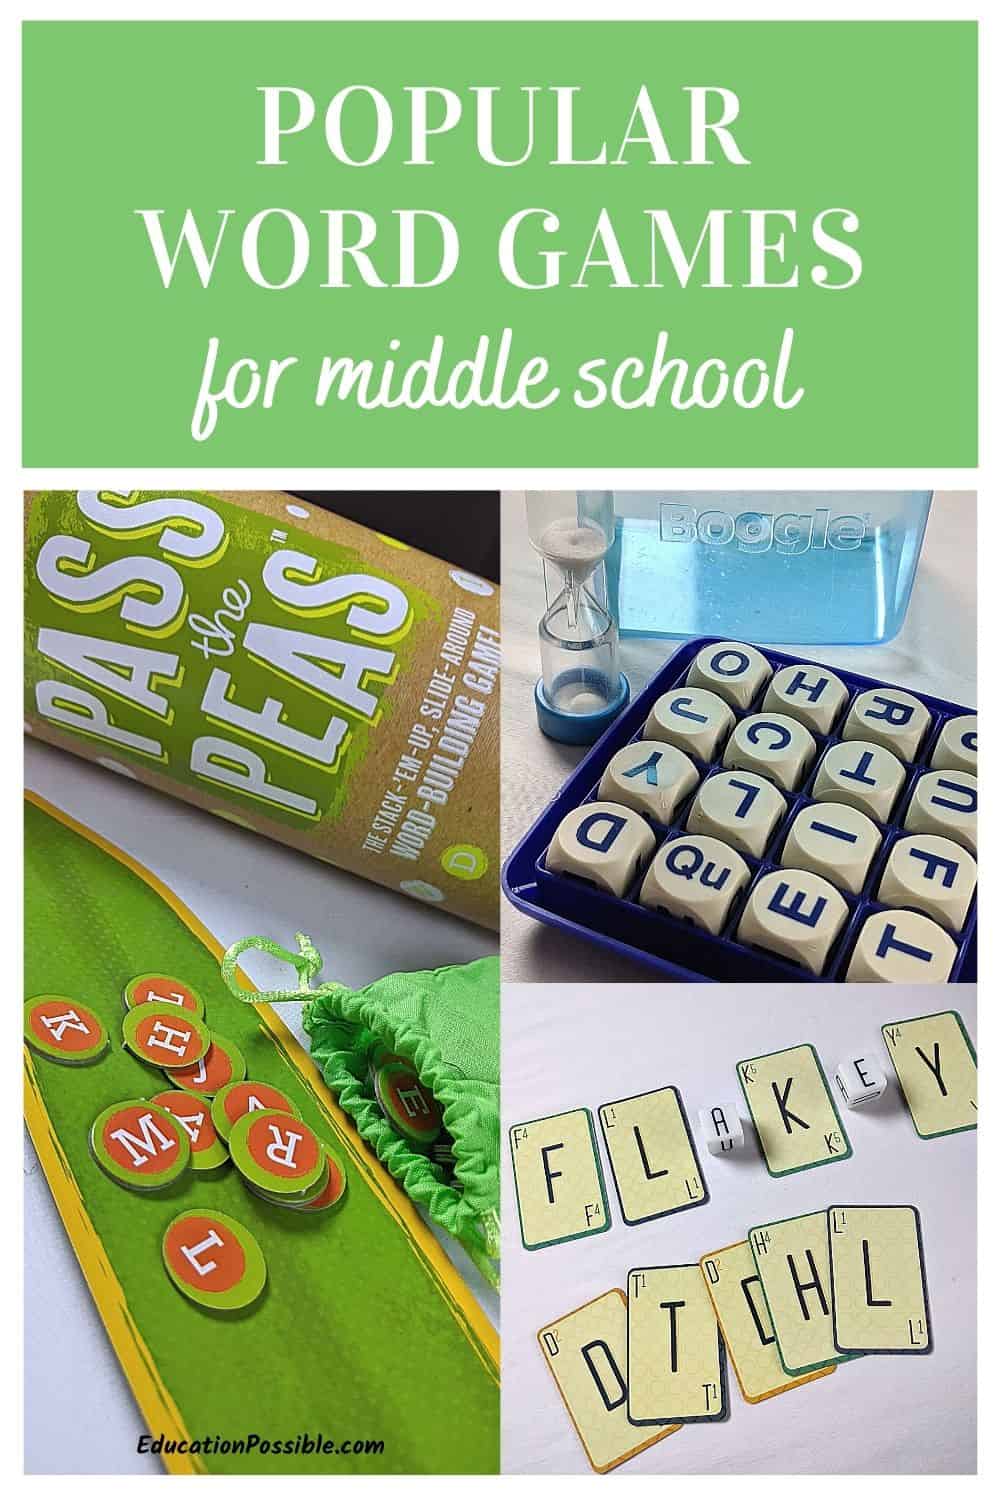 Collage of 3 word board games - Pass the Peas, Boggle, Wordical